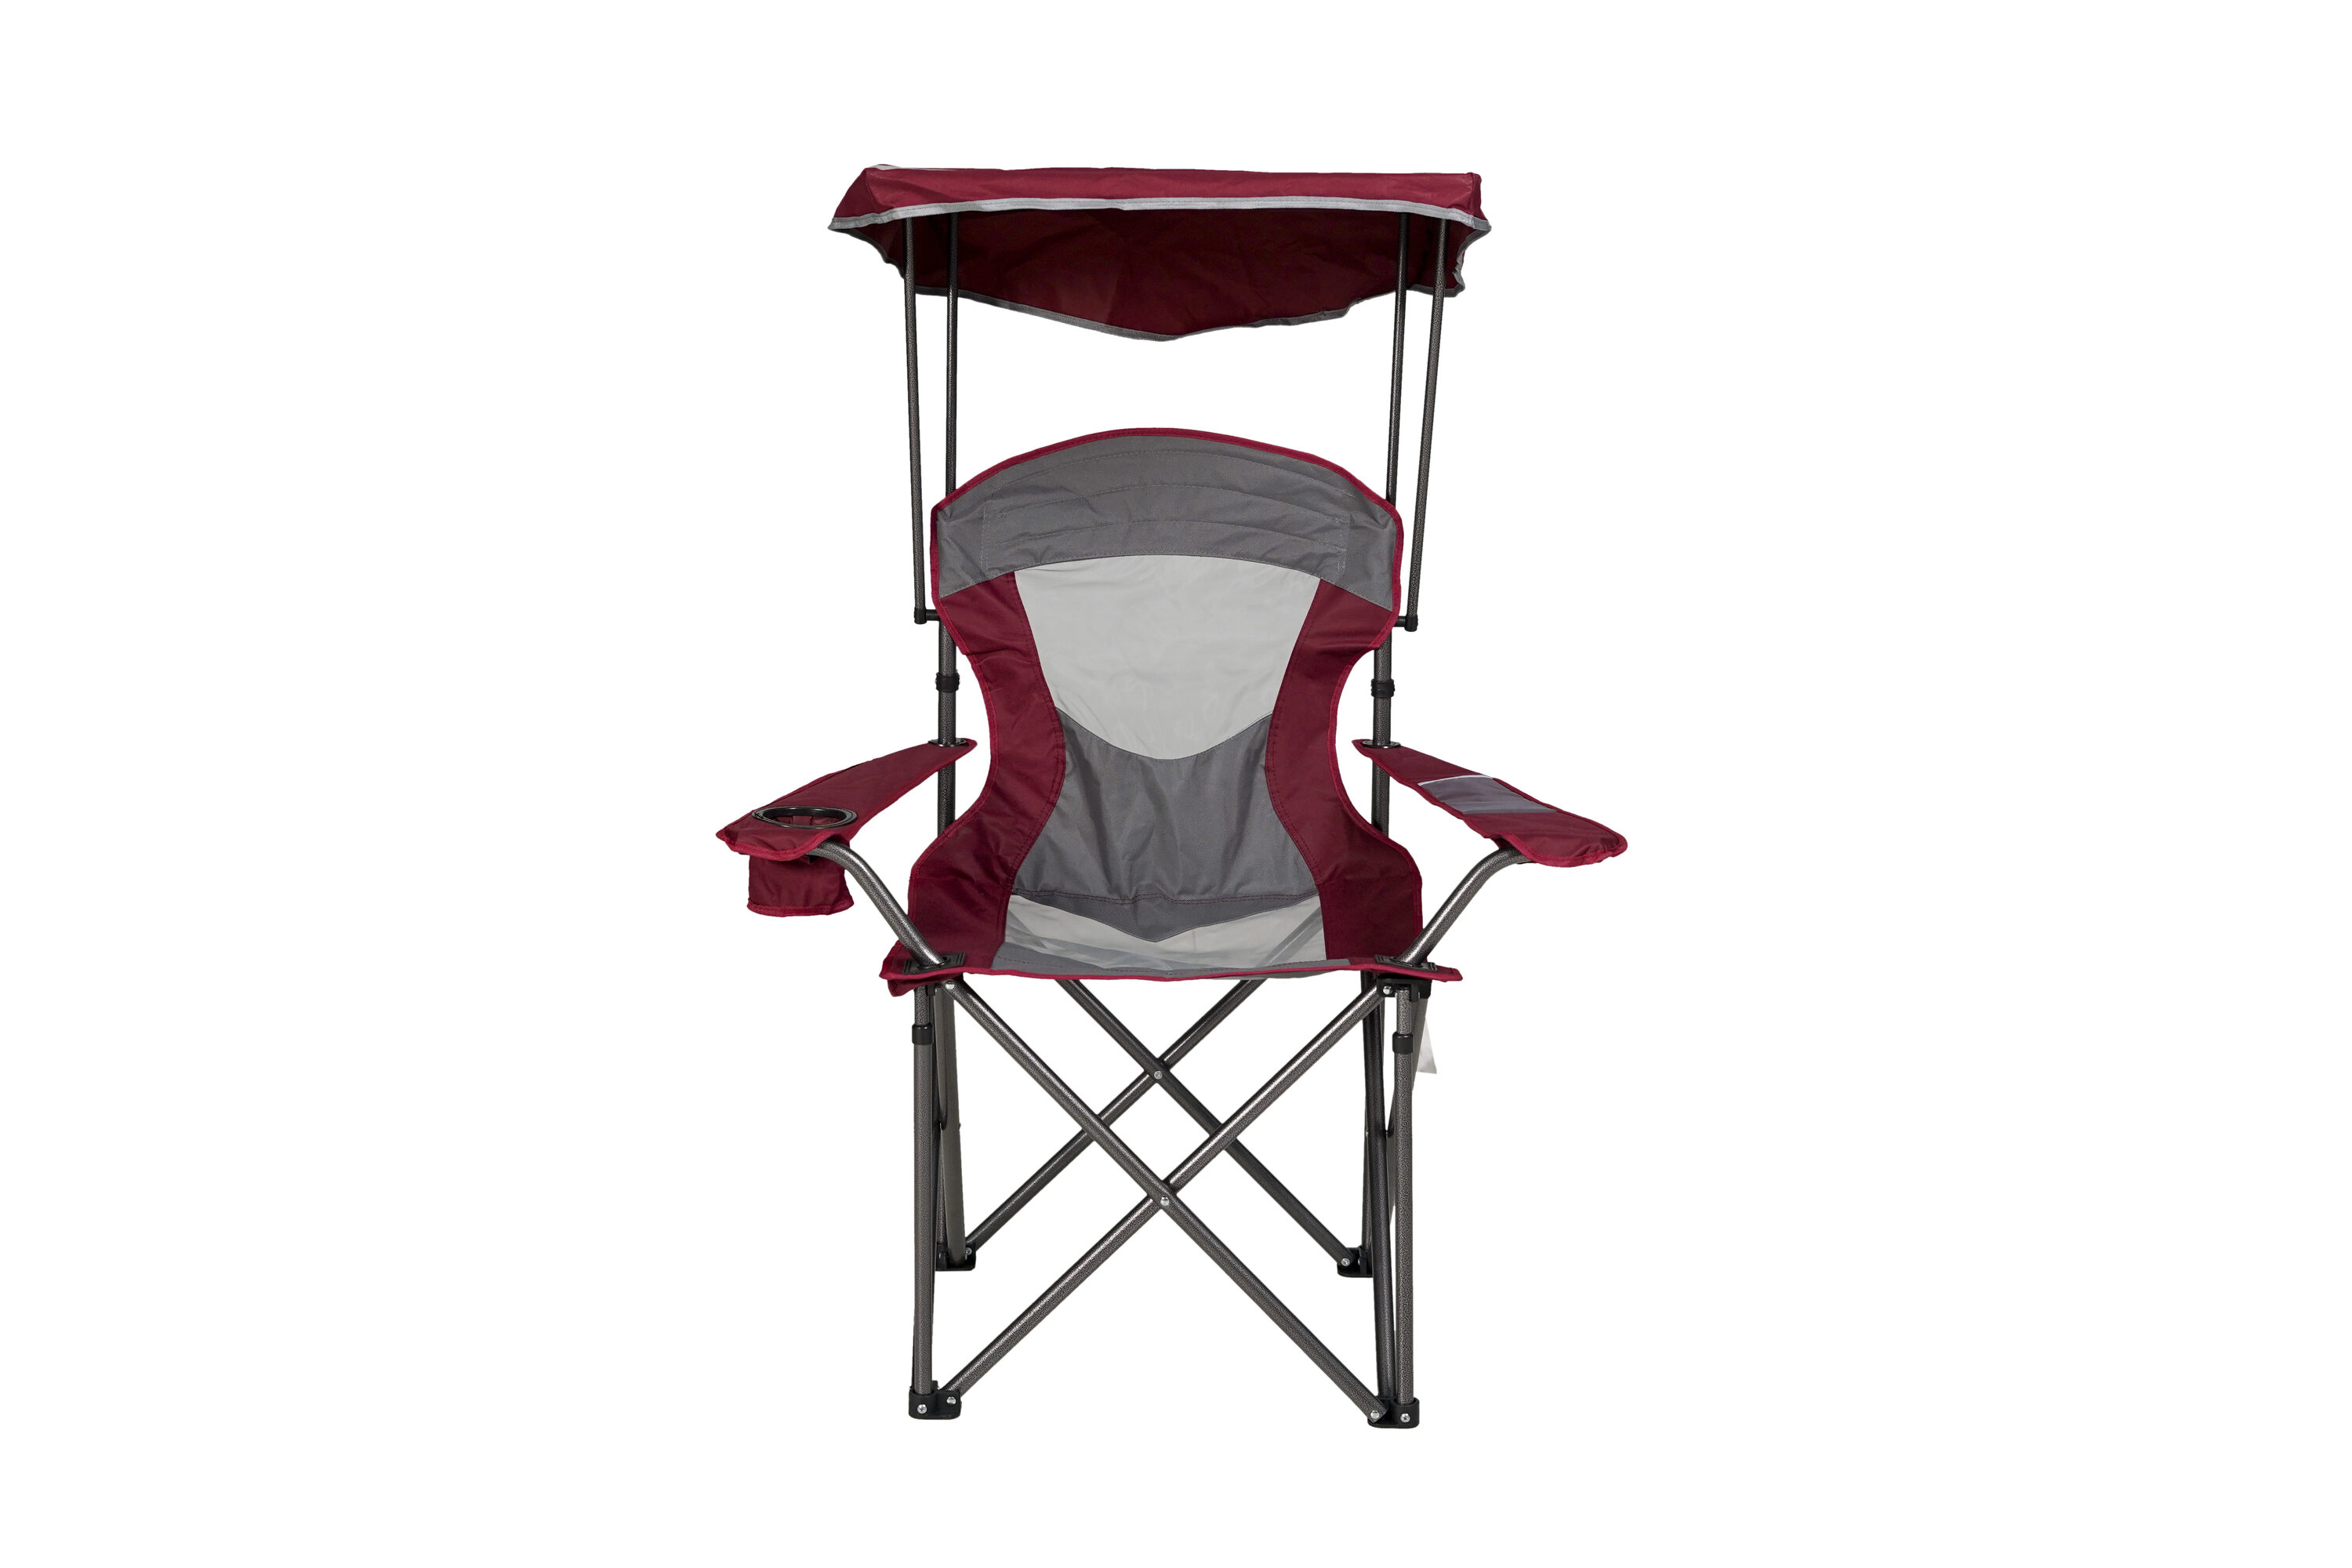 USA Camping Chair Folding Heavy Duty Portable Outdoor Chairs Support 330 LBS